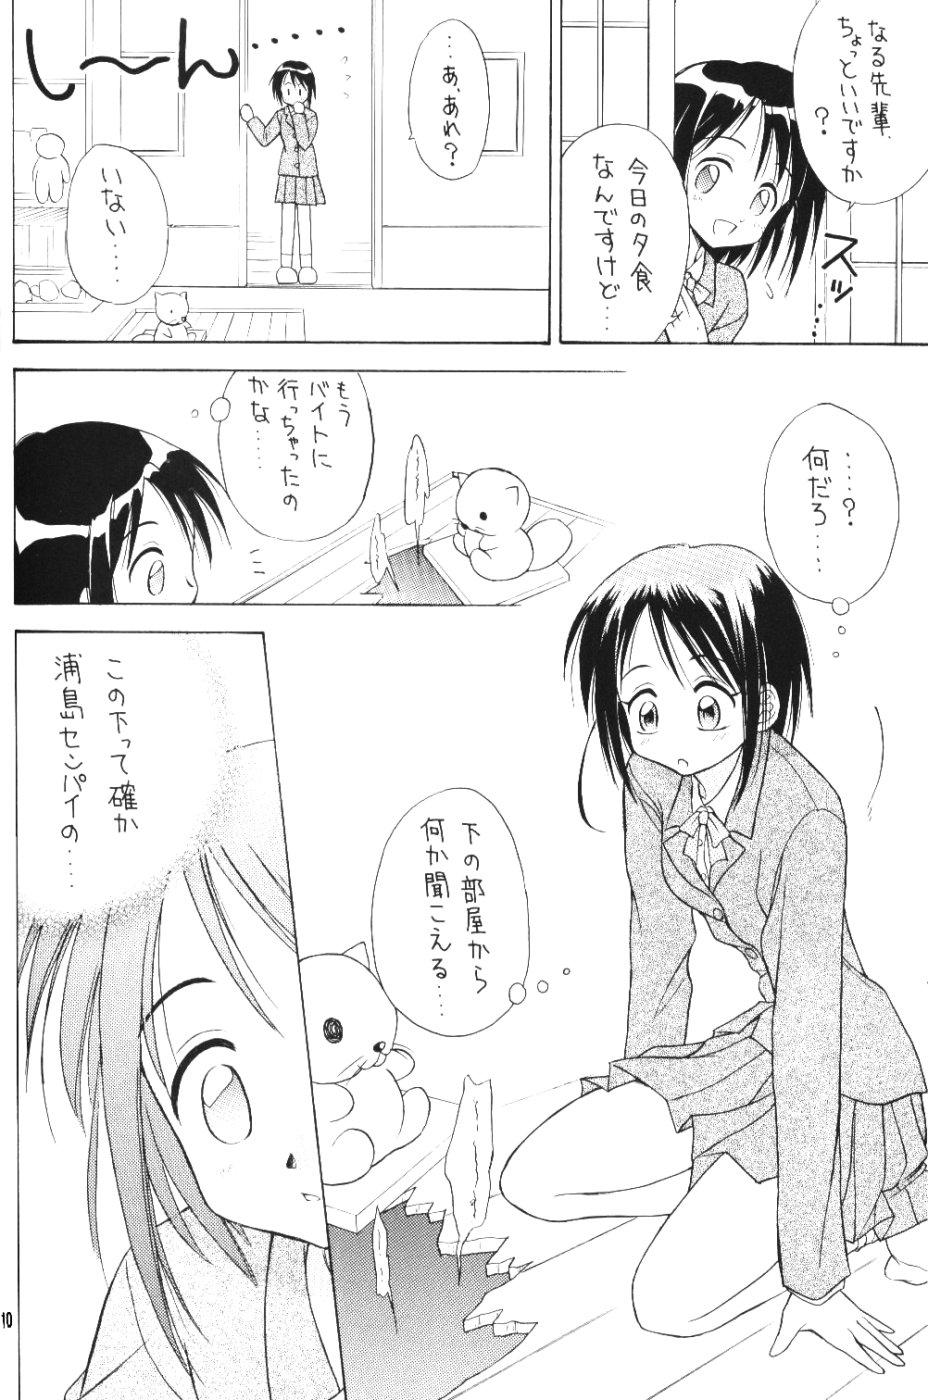 Homemade Lovely 4 - Love hina Amateurs Gone - Page 9